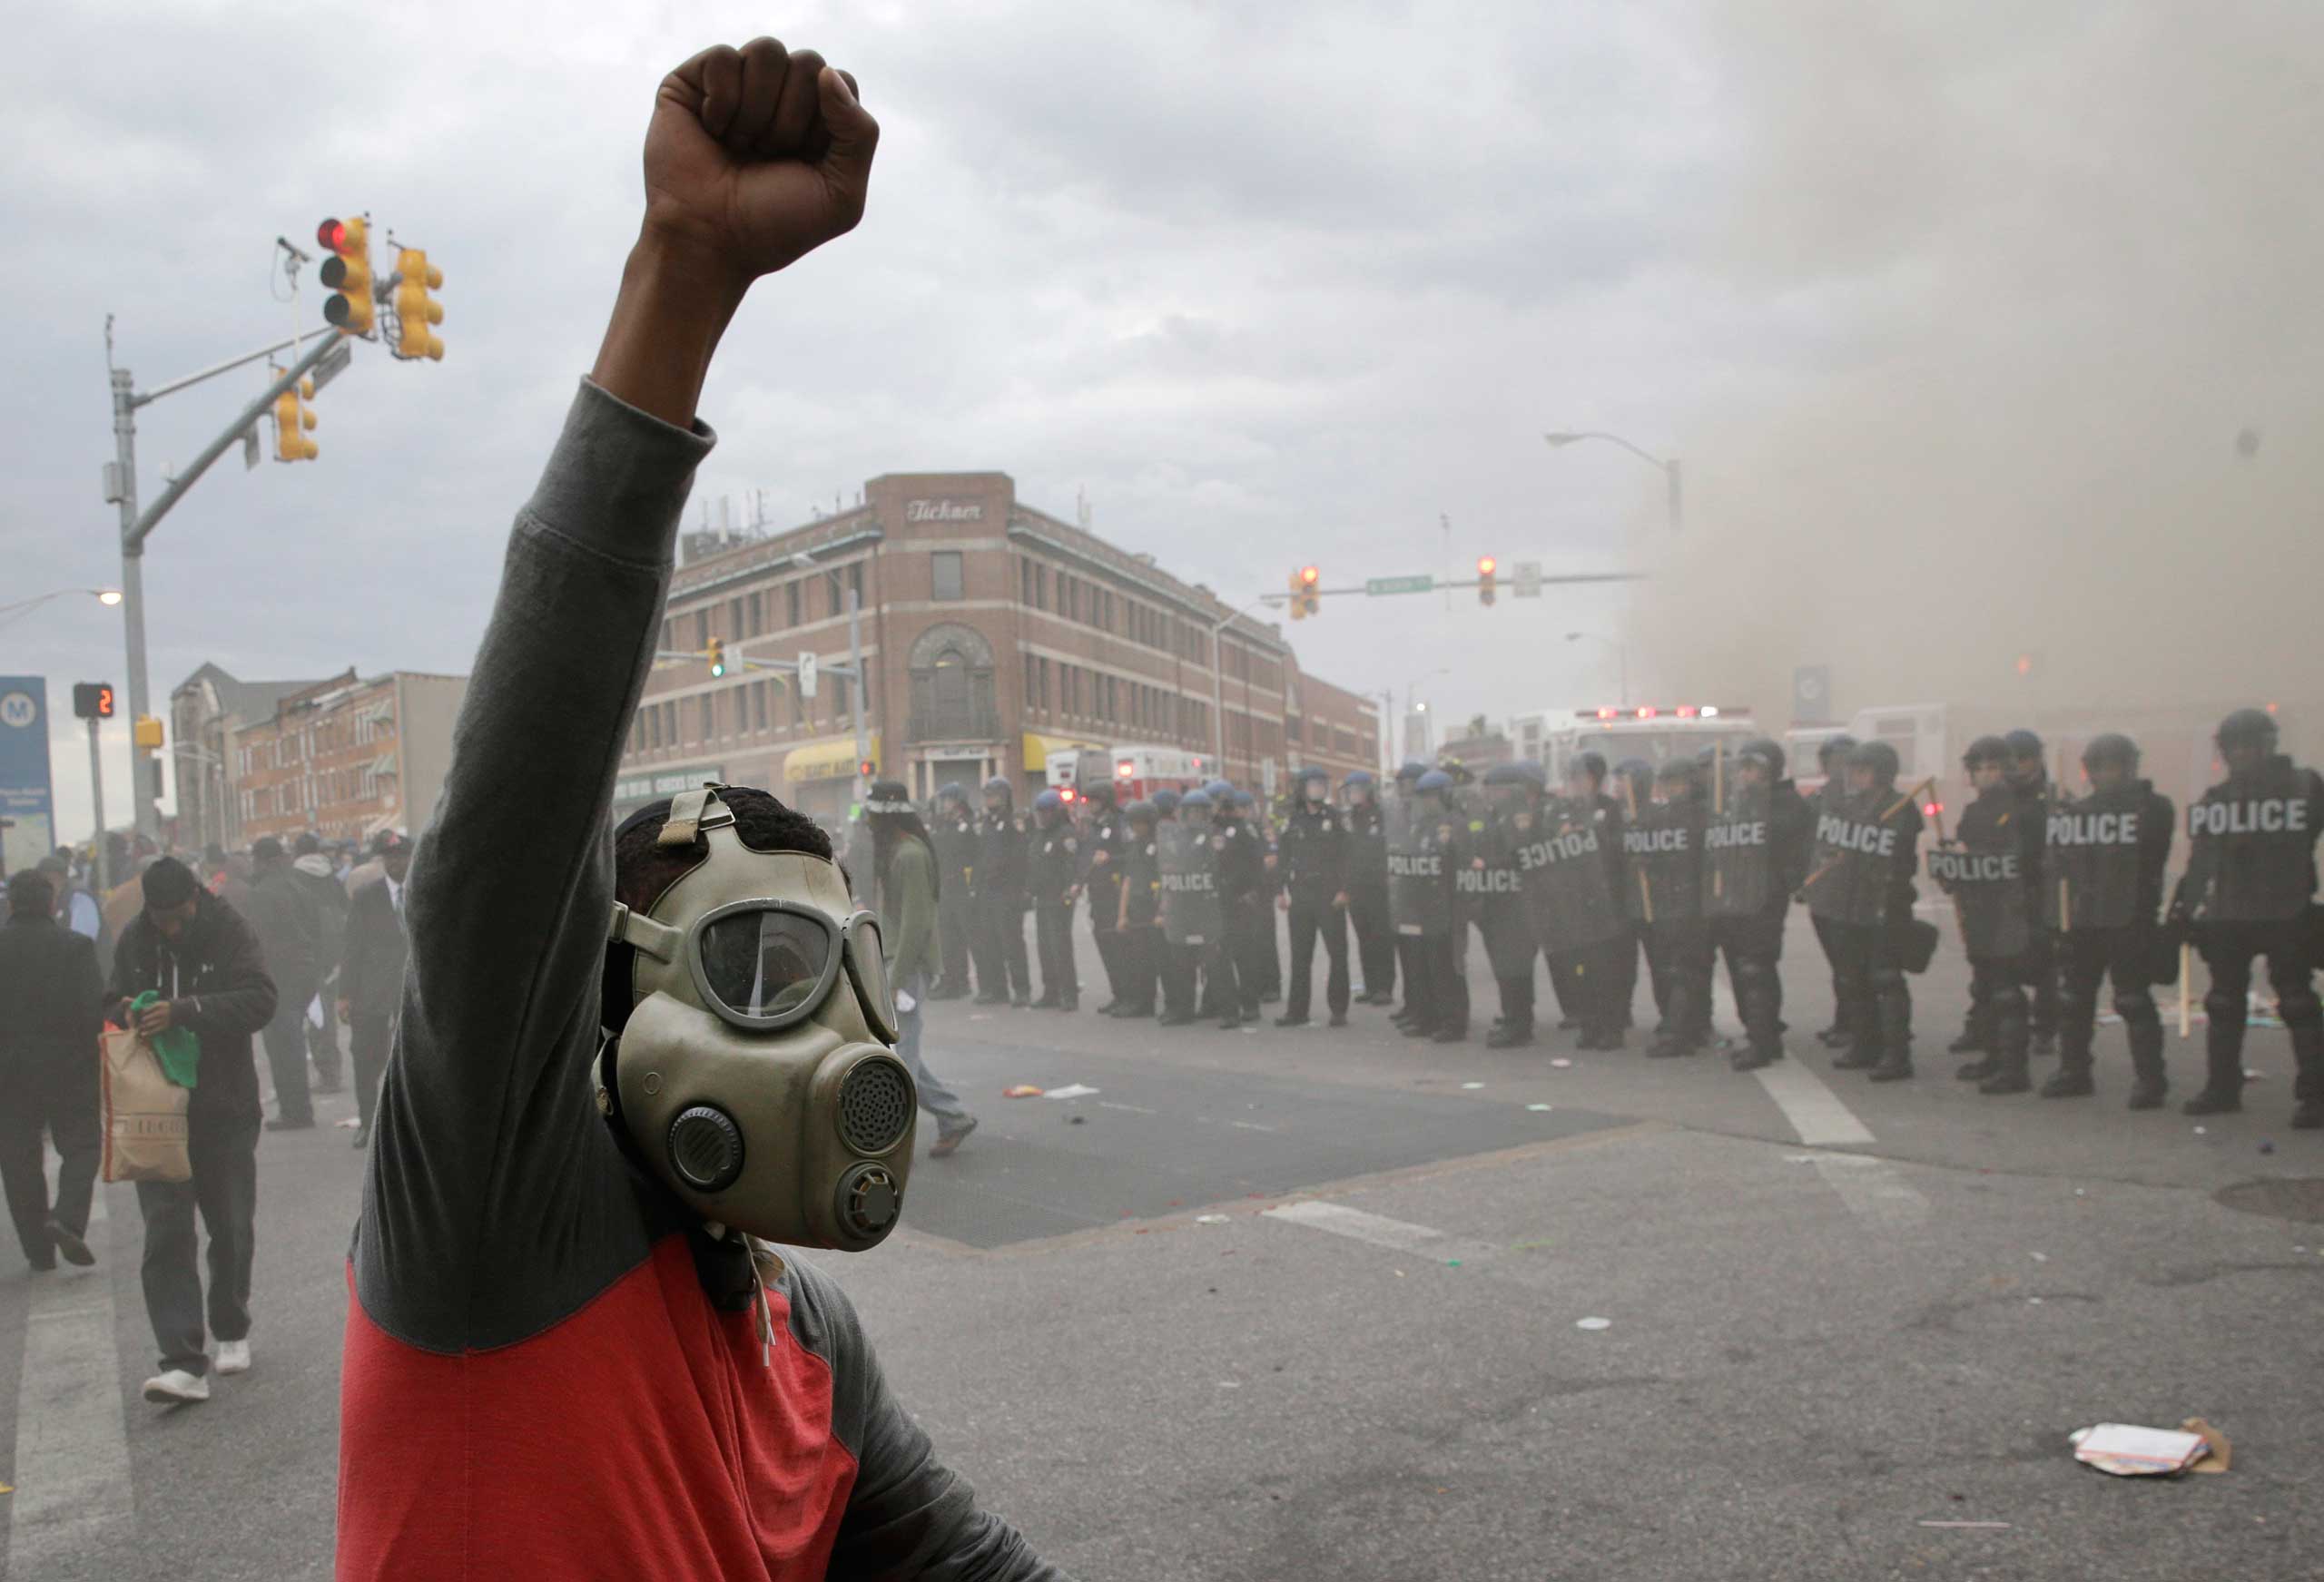 A demonstrator raises his fist as police stand in formation as a store burns during unrest following the funeral of Freddie Gray in Baltimore on Monday, April 27, 2015. (Patrick Semansky—AP)